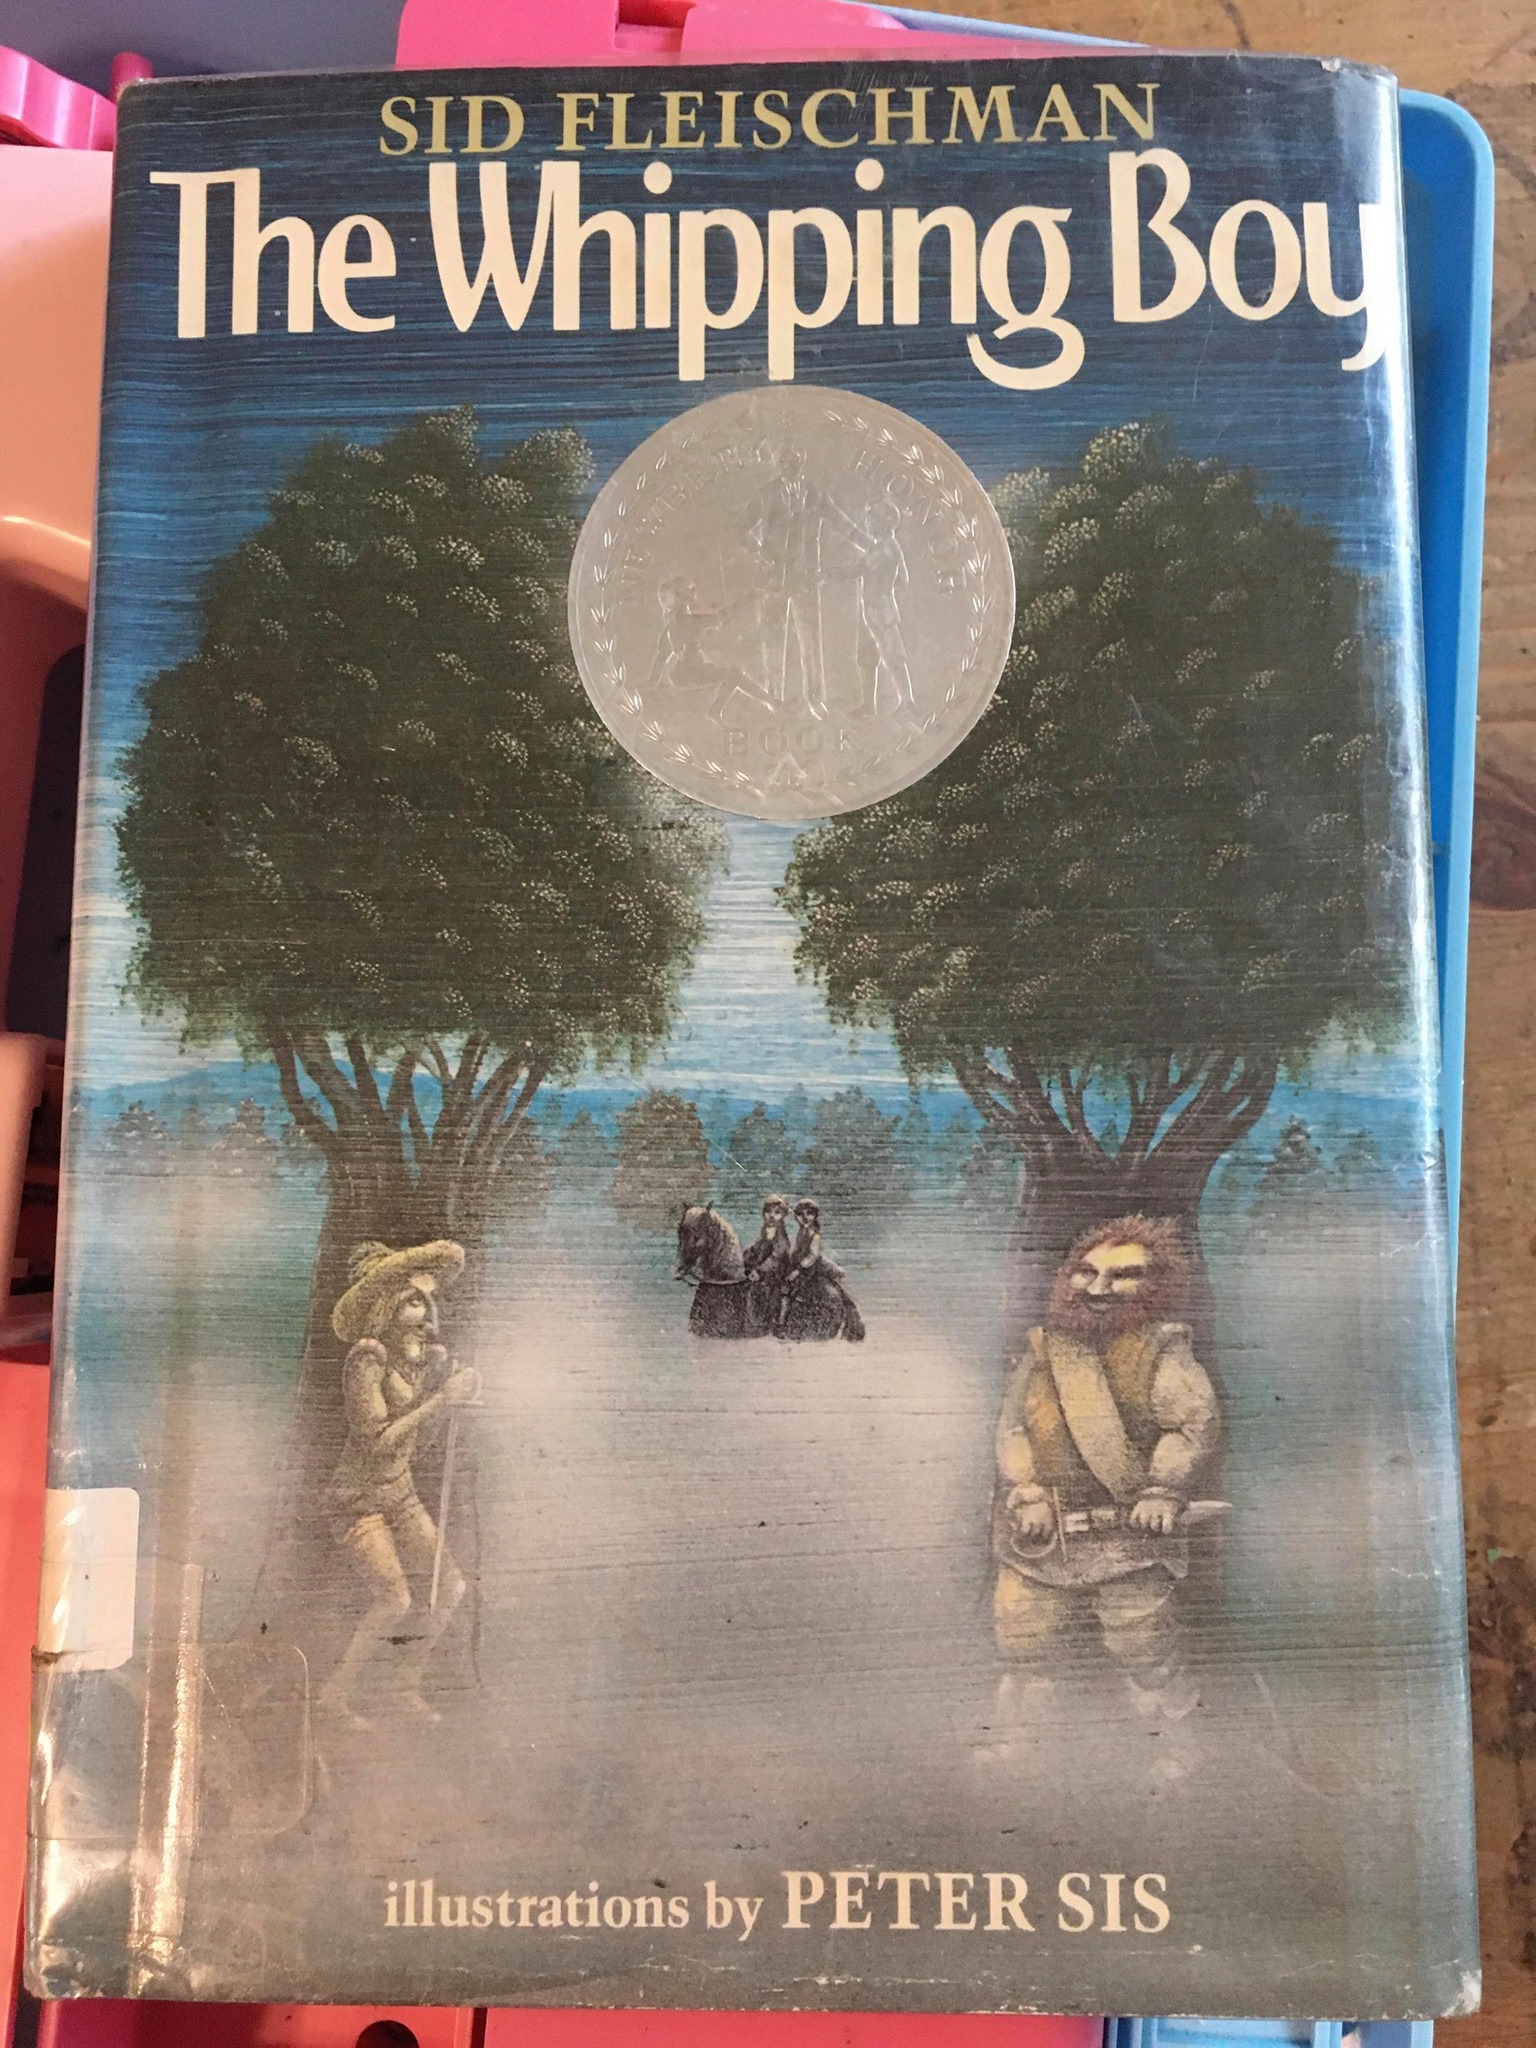 Book Review:The Whipping Boy